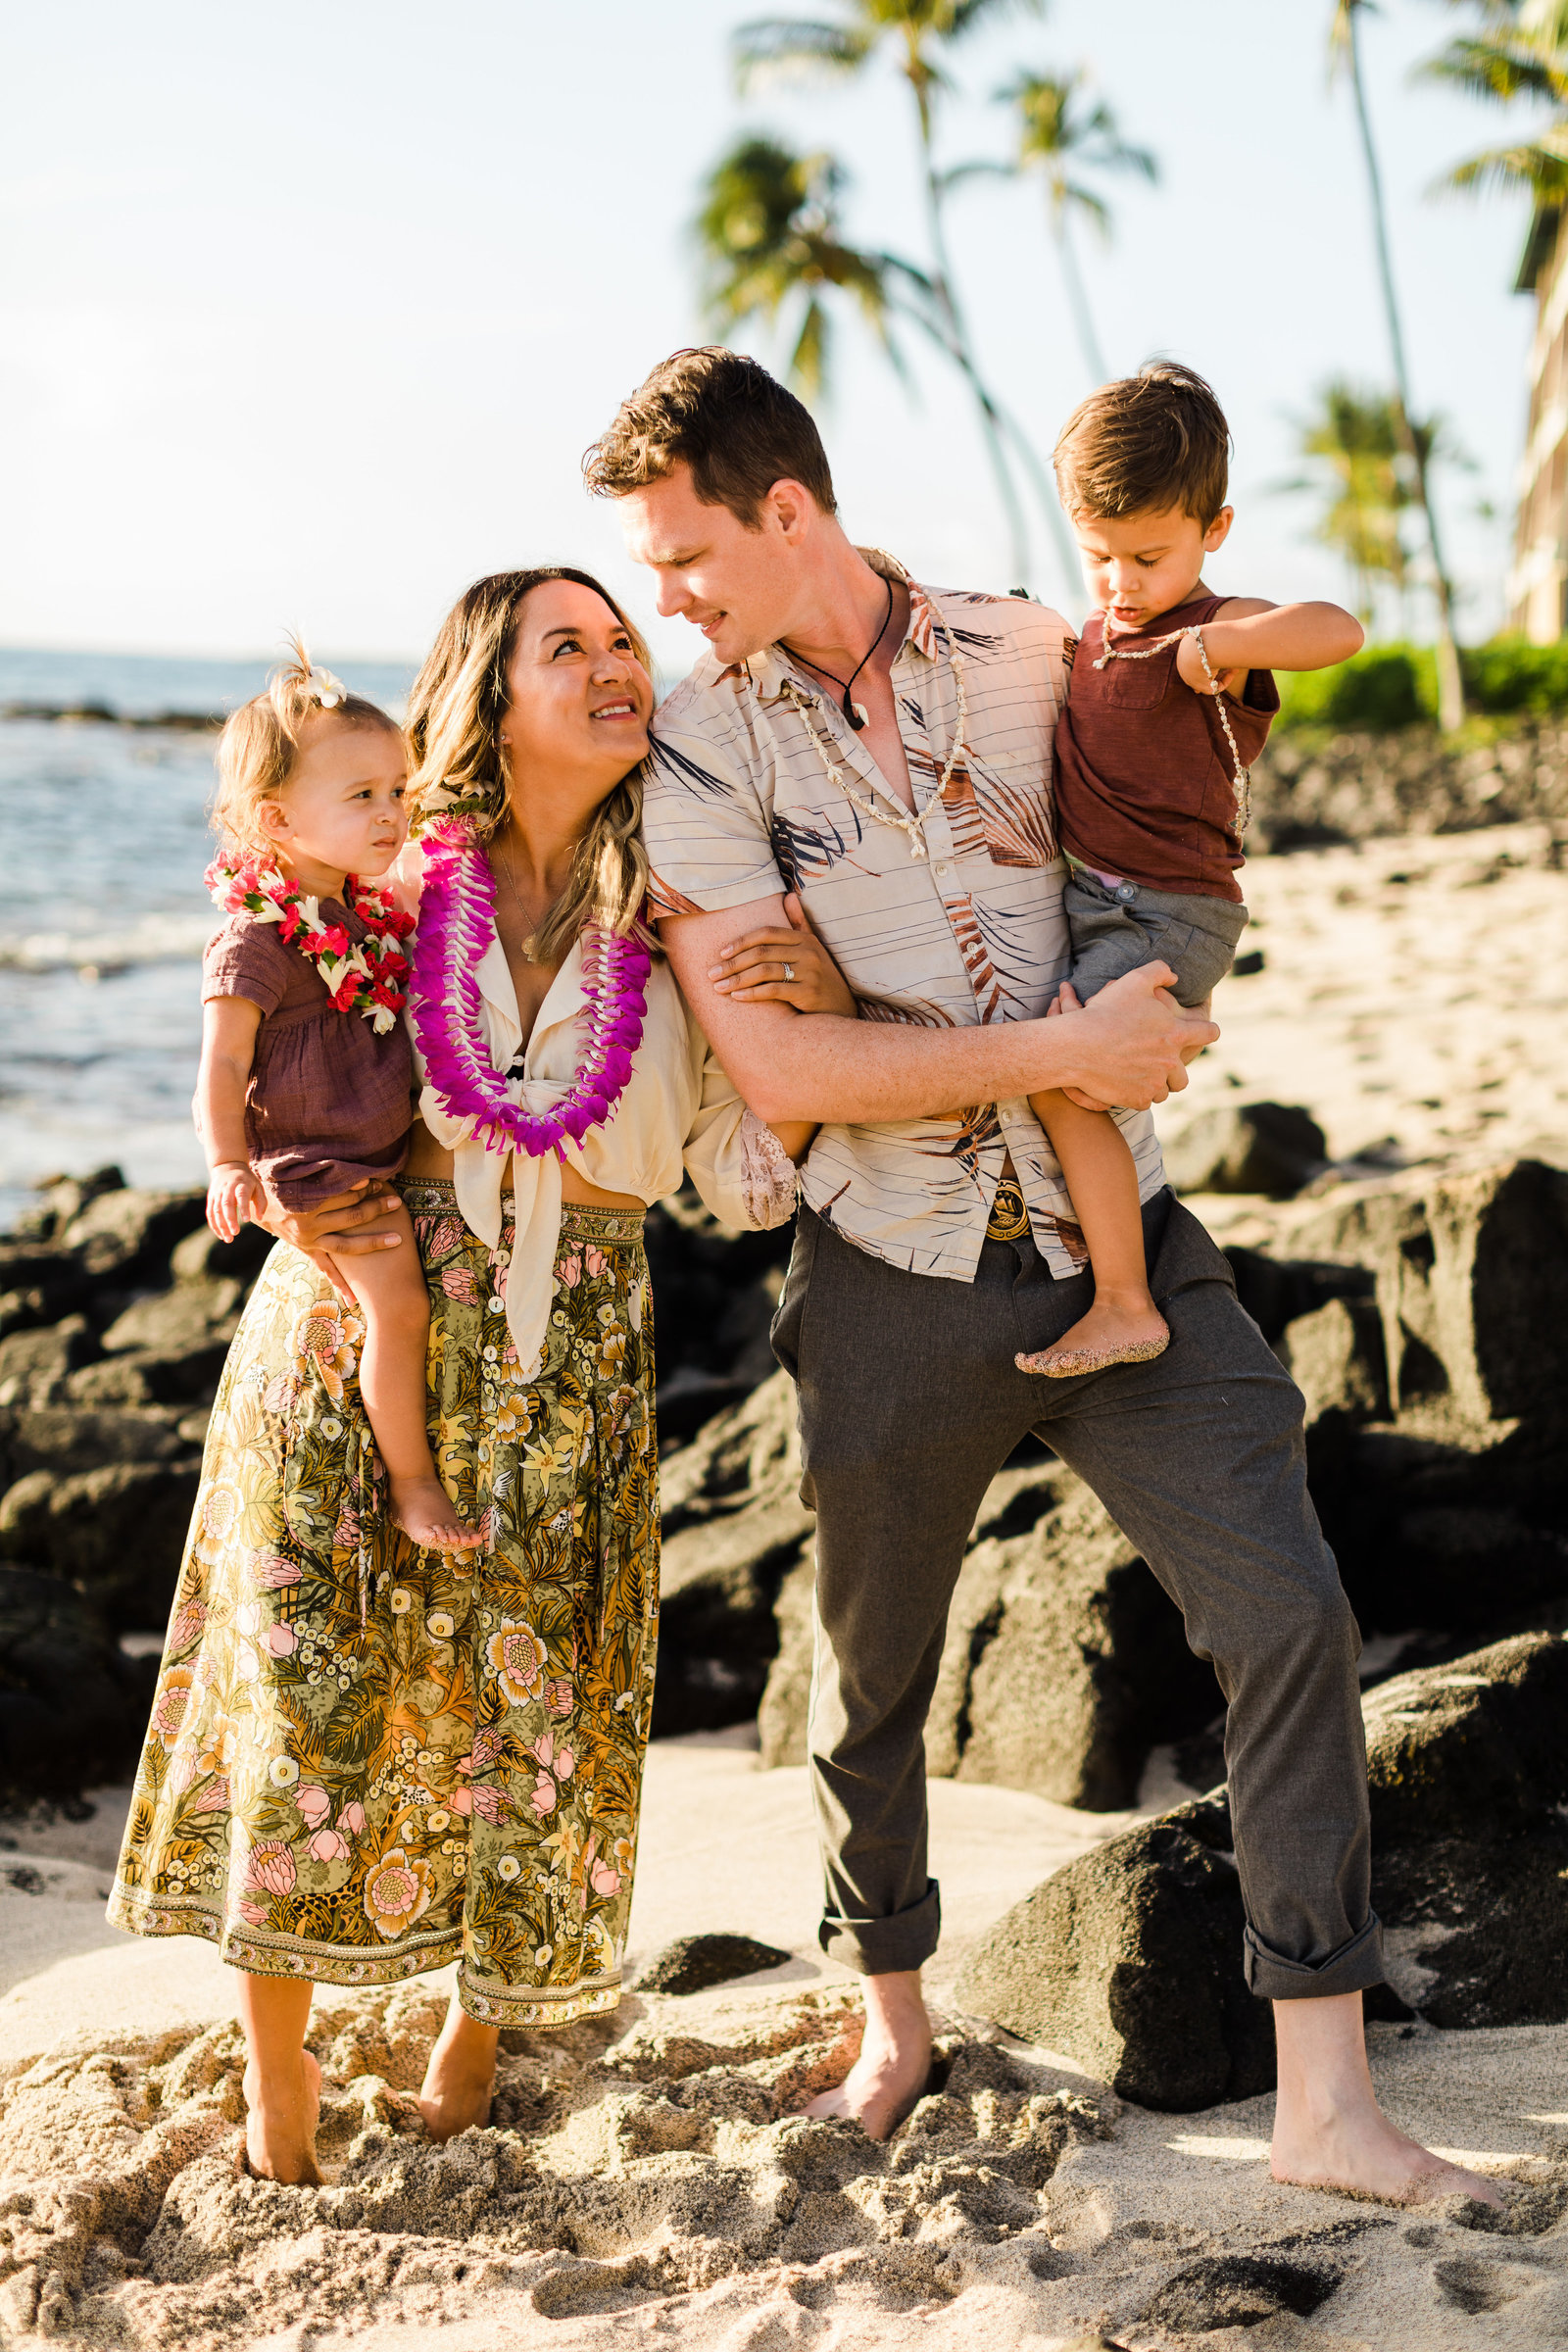 Young couple hold their two young kids on a beach in Hawaii, surrounded by lava rocks and palm trees while wearing leis